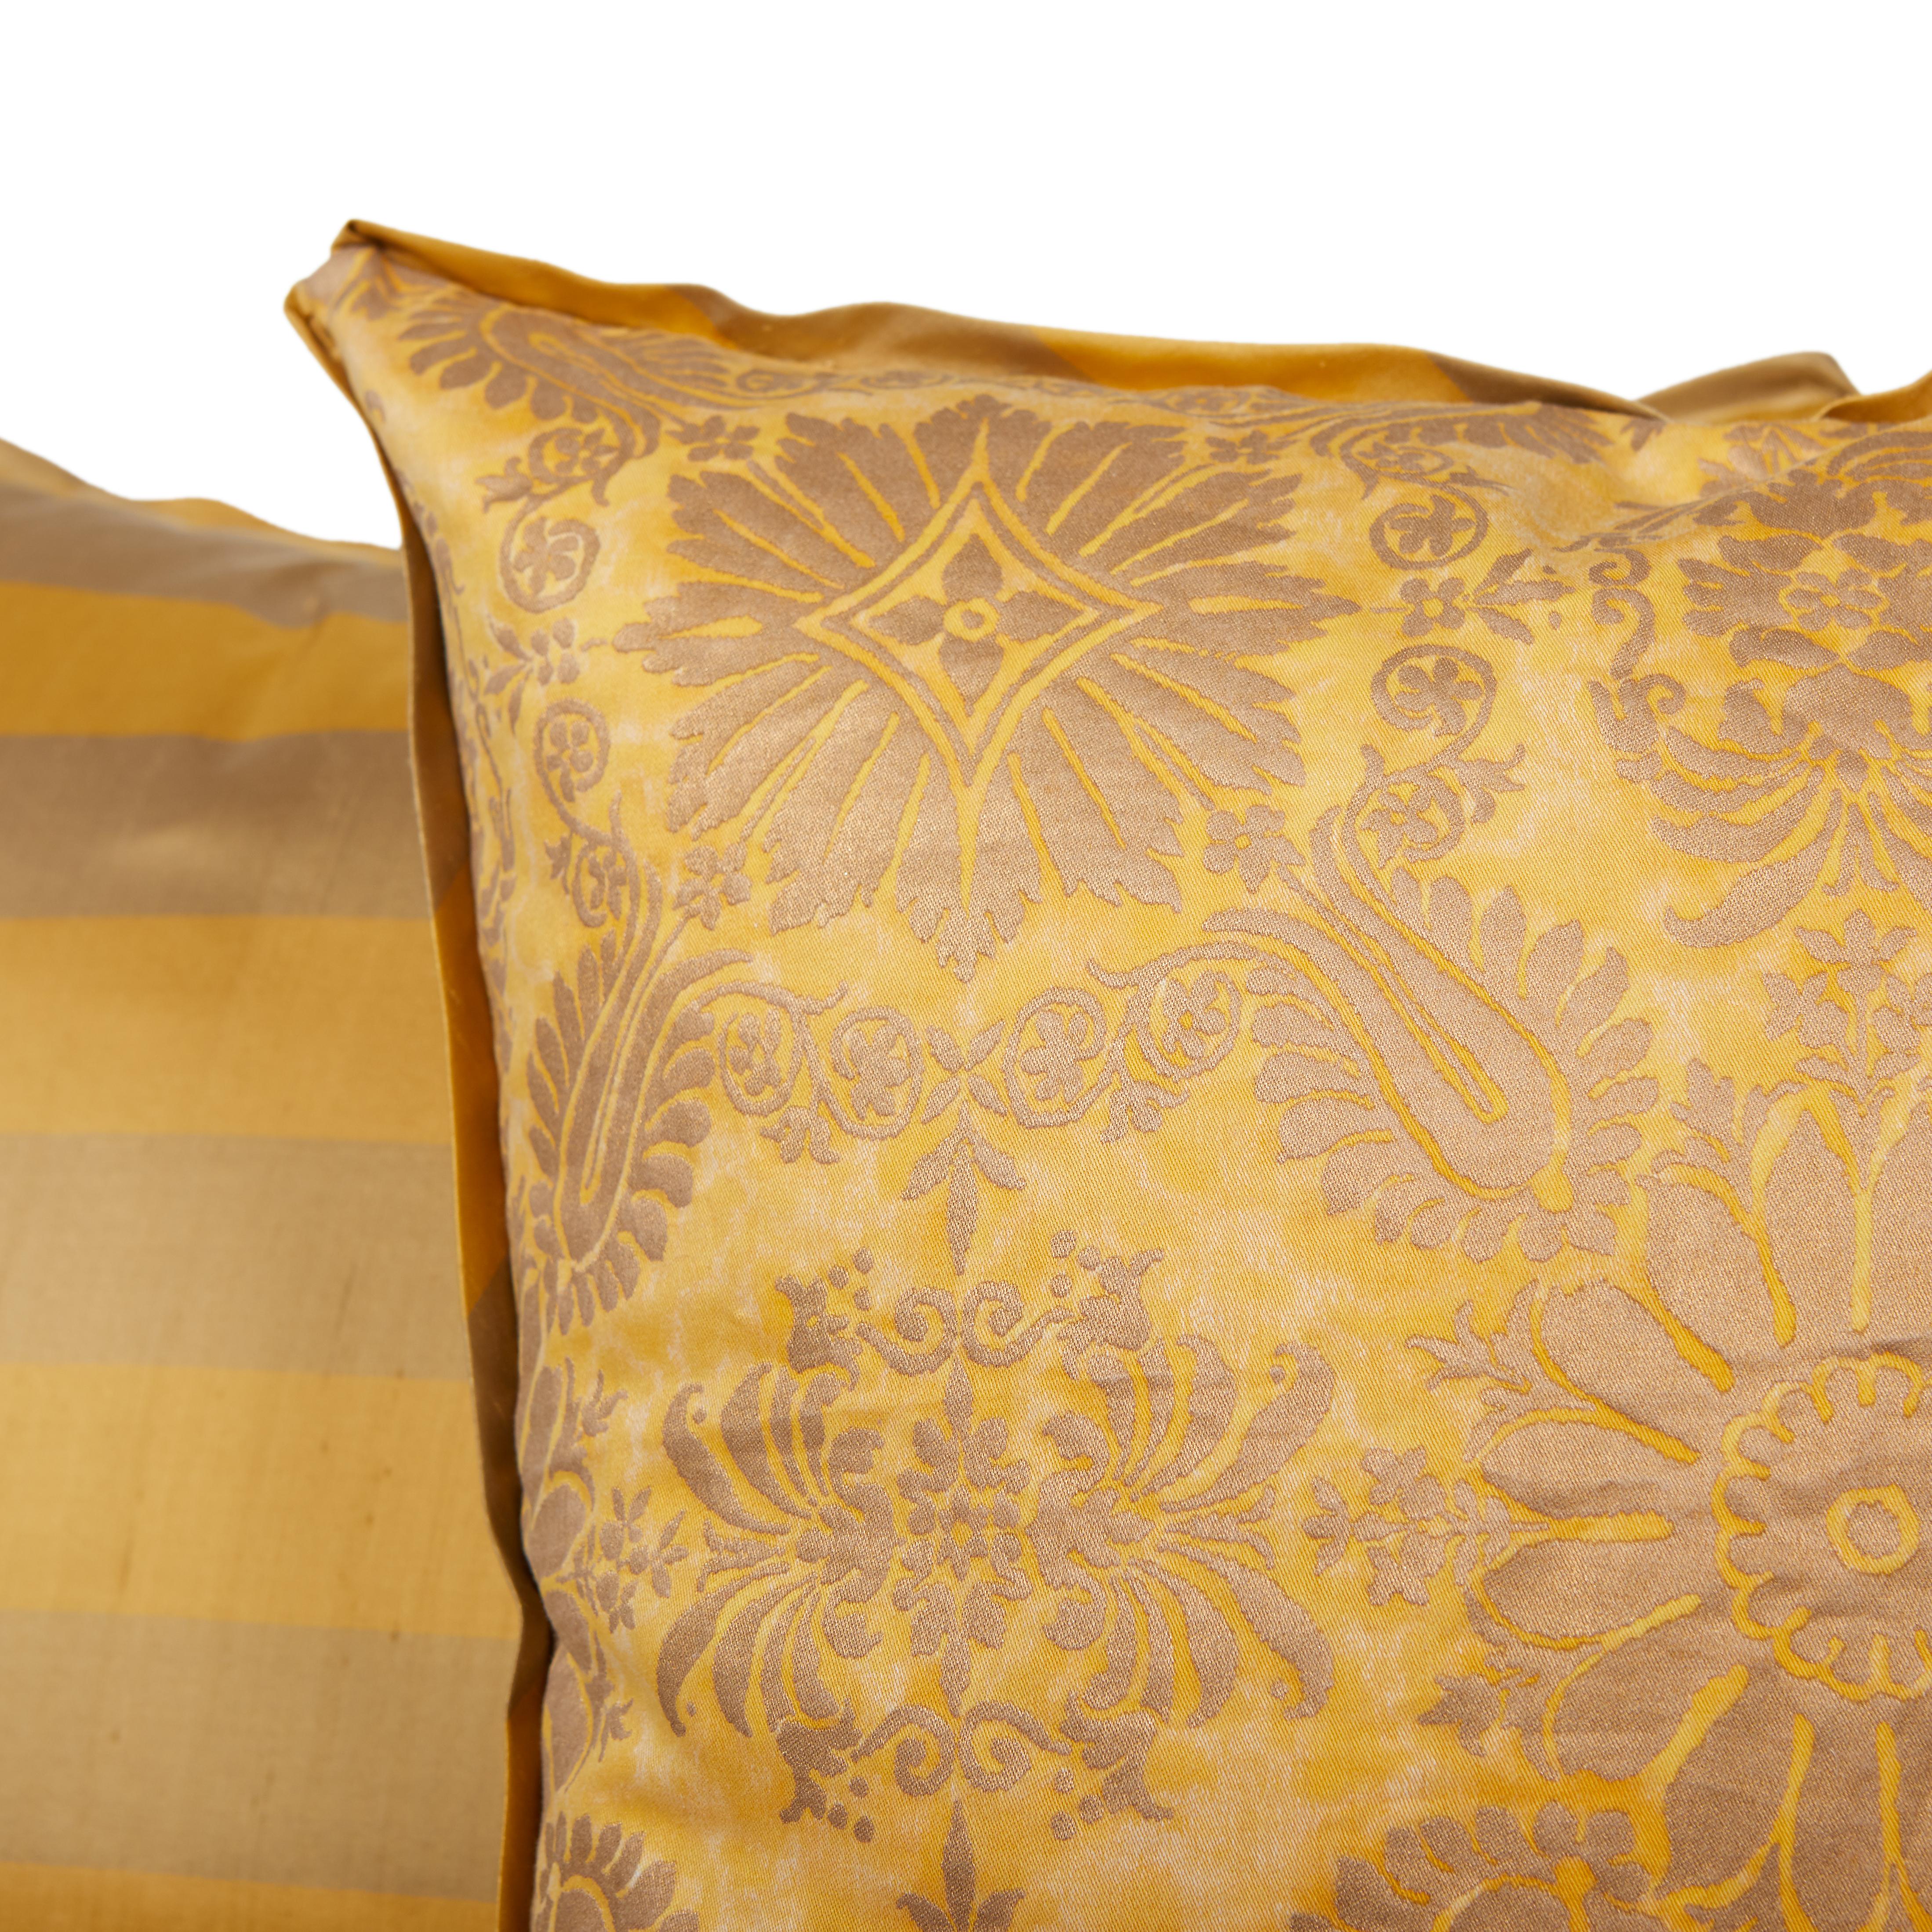 A pair of Fortuny fabric cushion in the Impero pattern, featuring a gold and beige colorway. Exquisite details including a lovely striped silk backing material and golt silk edging. The Impero pattern is a 19th century French design with formal